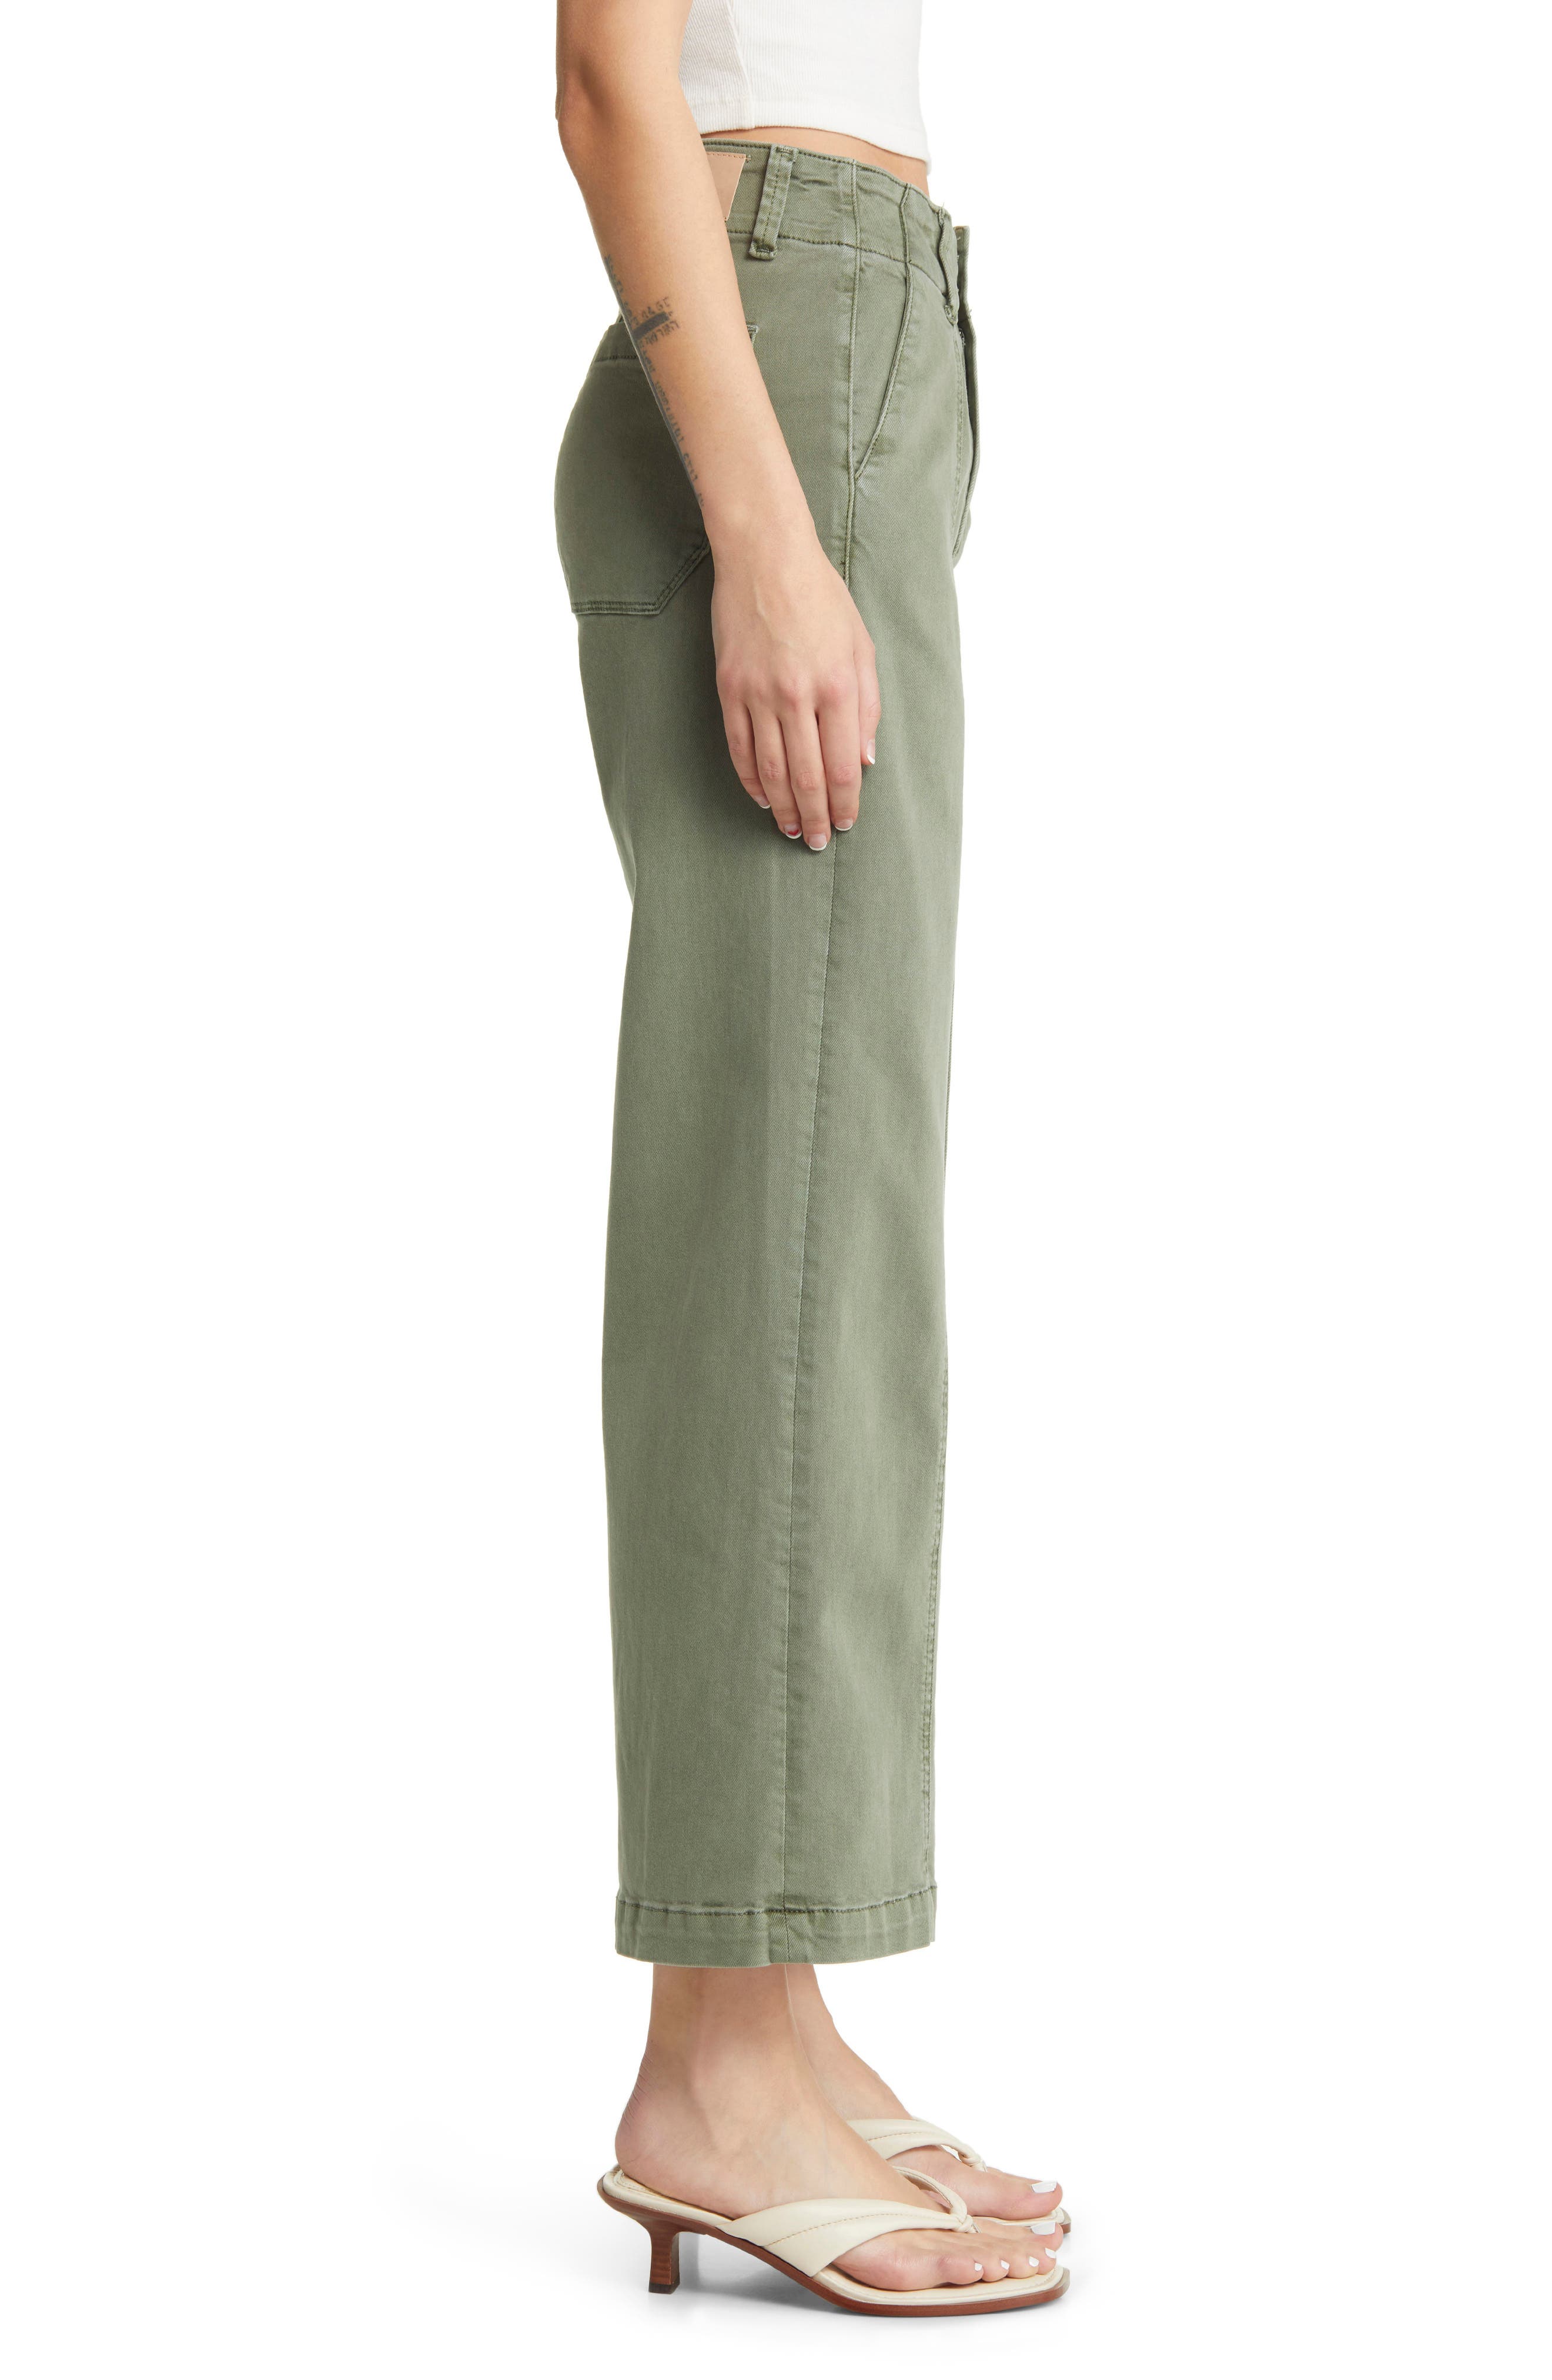 PAIGE Brooklyn High Rise Wide Leg Jeans in Vintage Ivy Green